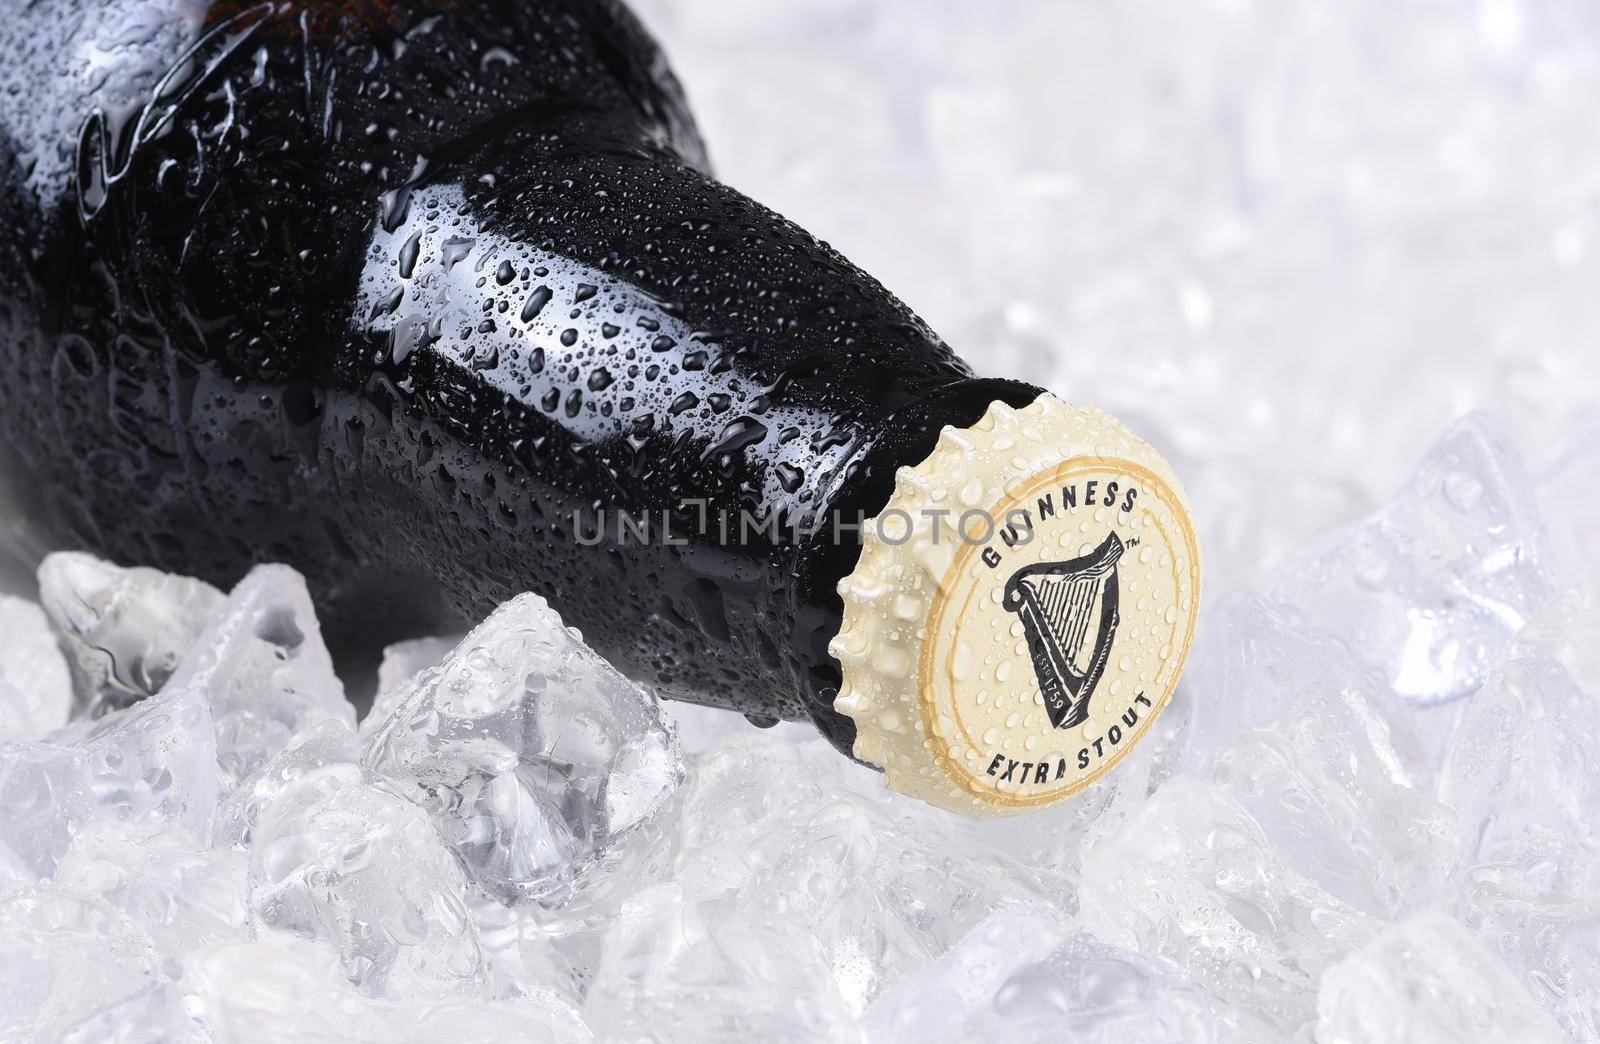 IRVINE, CA - December 15, 2017: A bottle of Guinness Extra Stout on a bed of ice. The Irish beer is one of the worlds most successful beer brands with annual sales over 850 million liters.